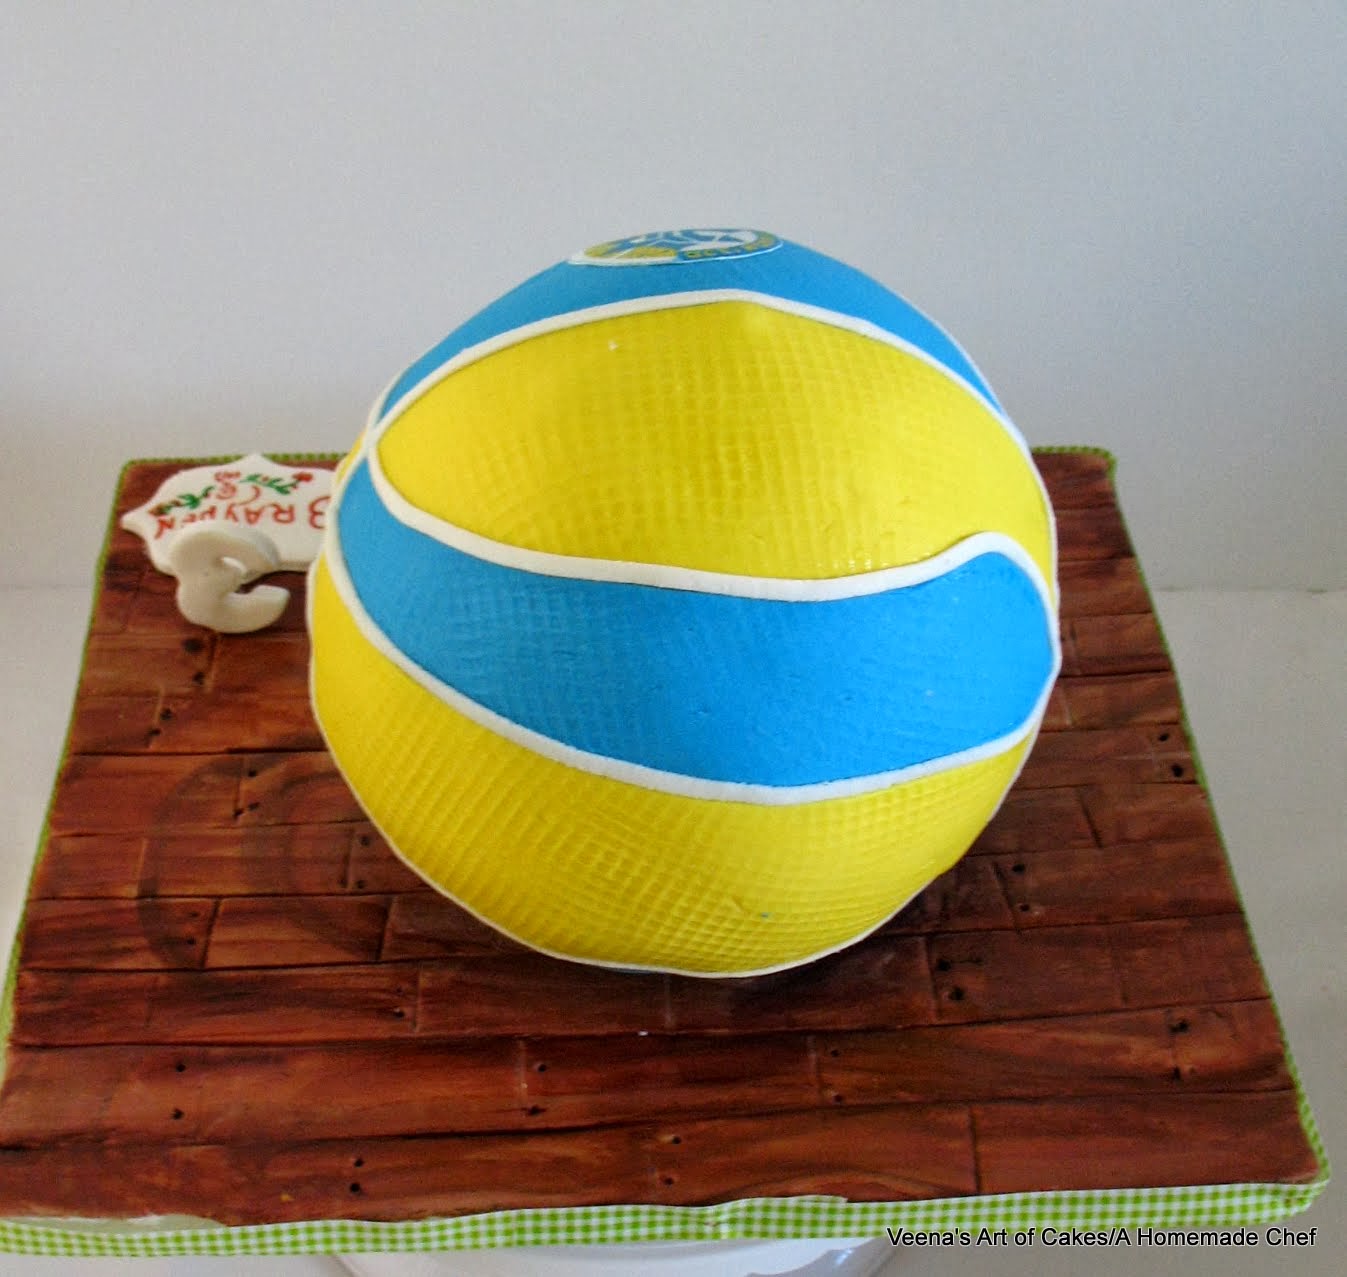 a cake in the shape of a basketball.